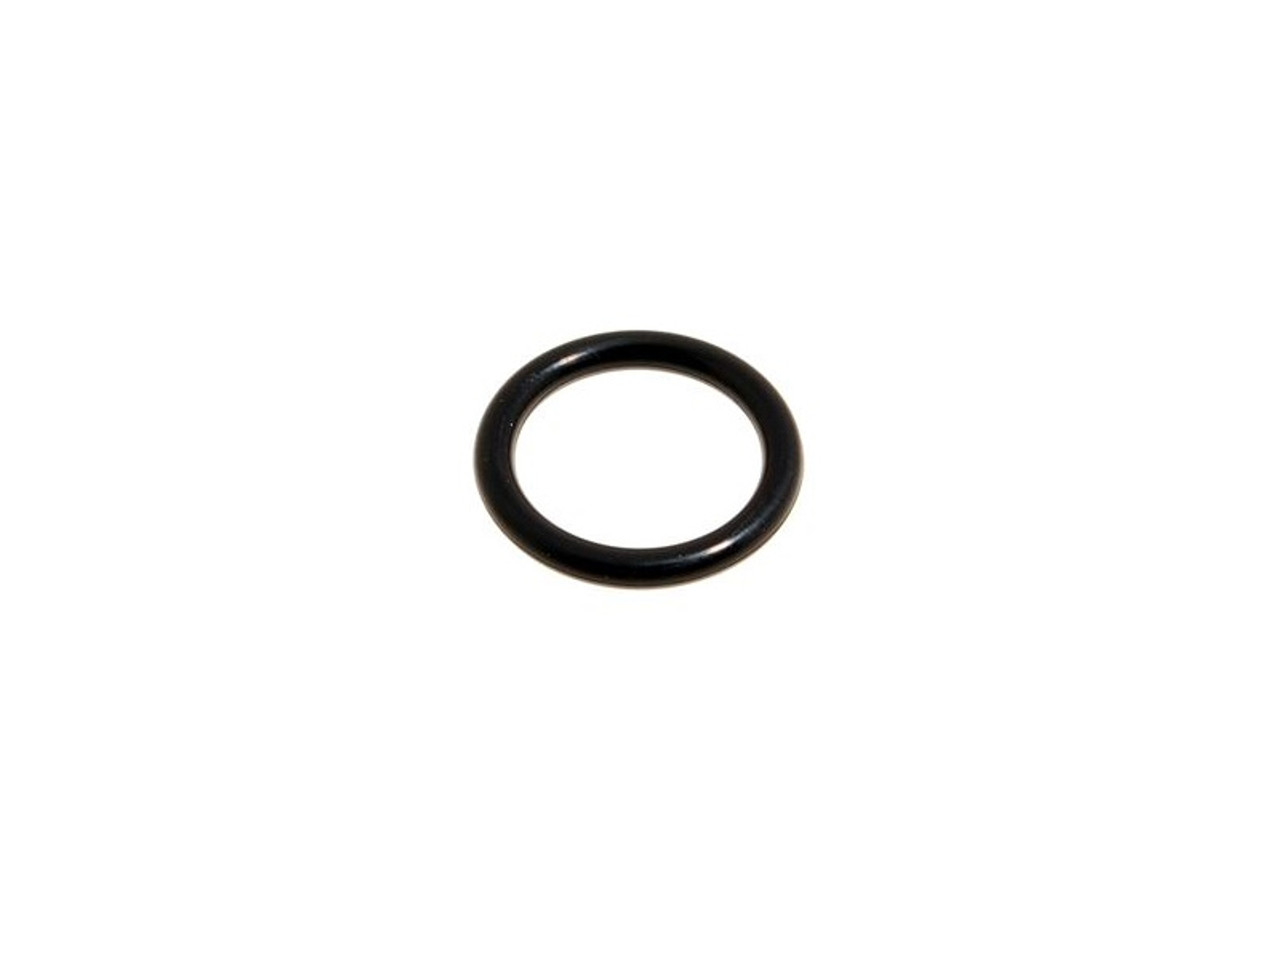 Genuine Discovery 2, Defender and P38 Air Conditioning Compressor O Ring - STC3177